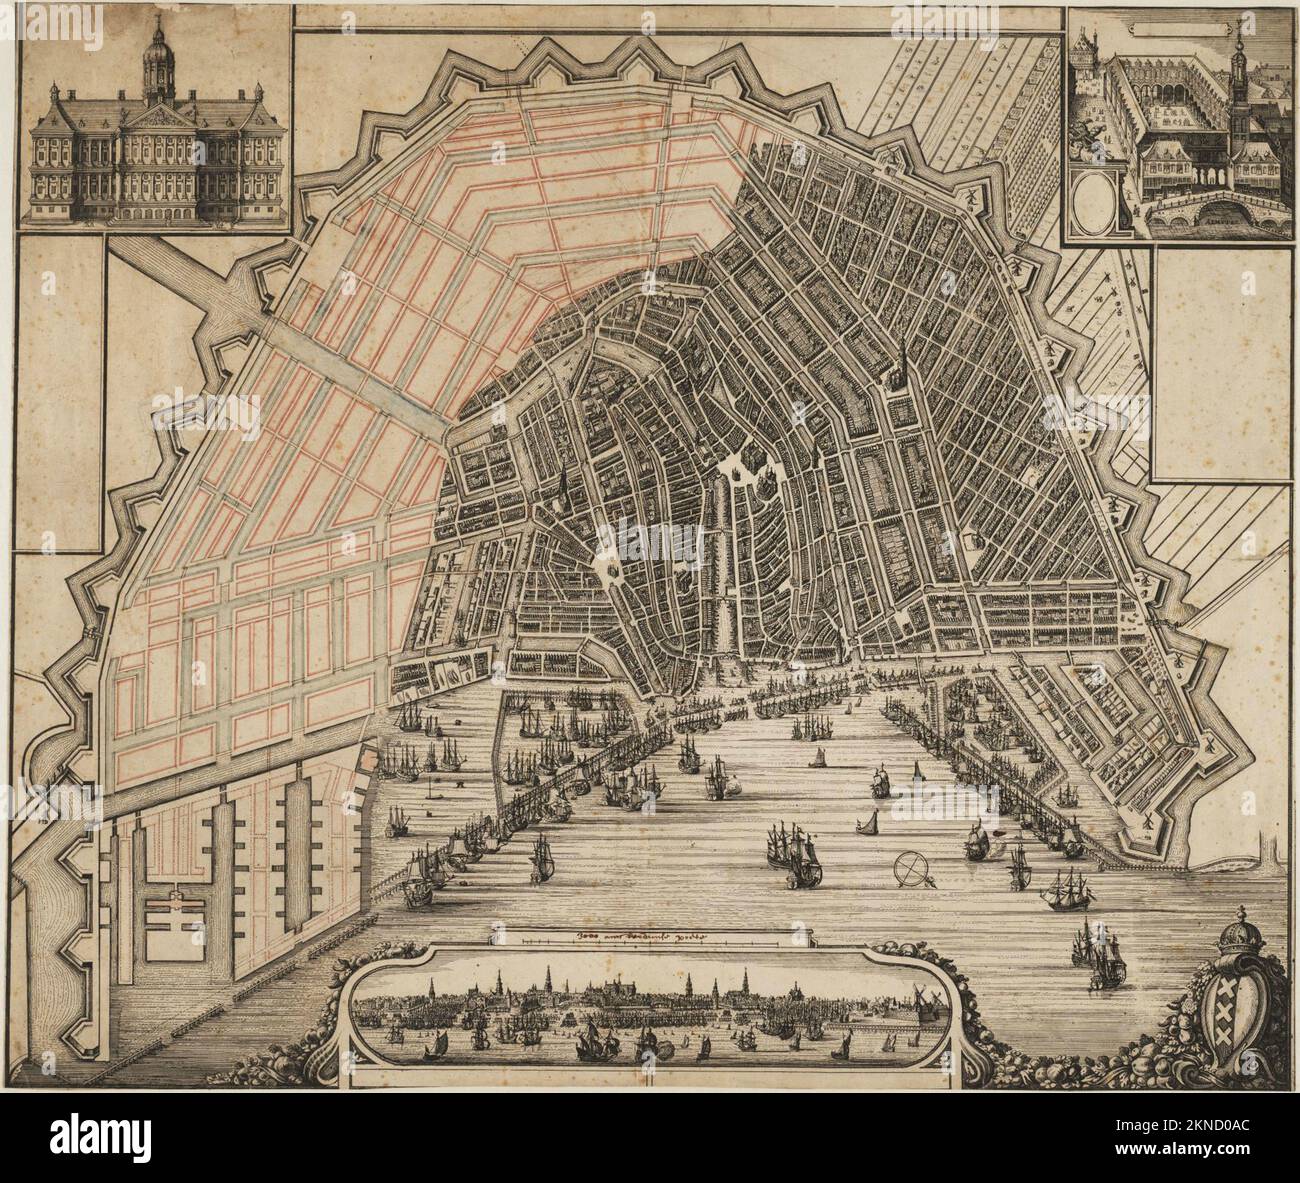 Vintage city plan of Amsterdam and area around it from 16th-18th century. Maps are beautifully hand illustrated and engraved showing it at the time. Stock Photo